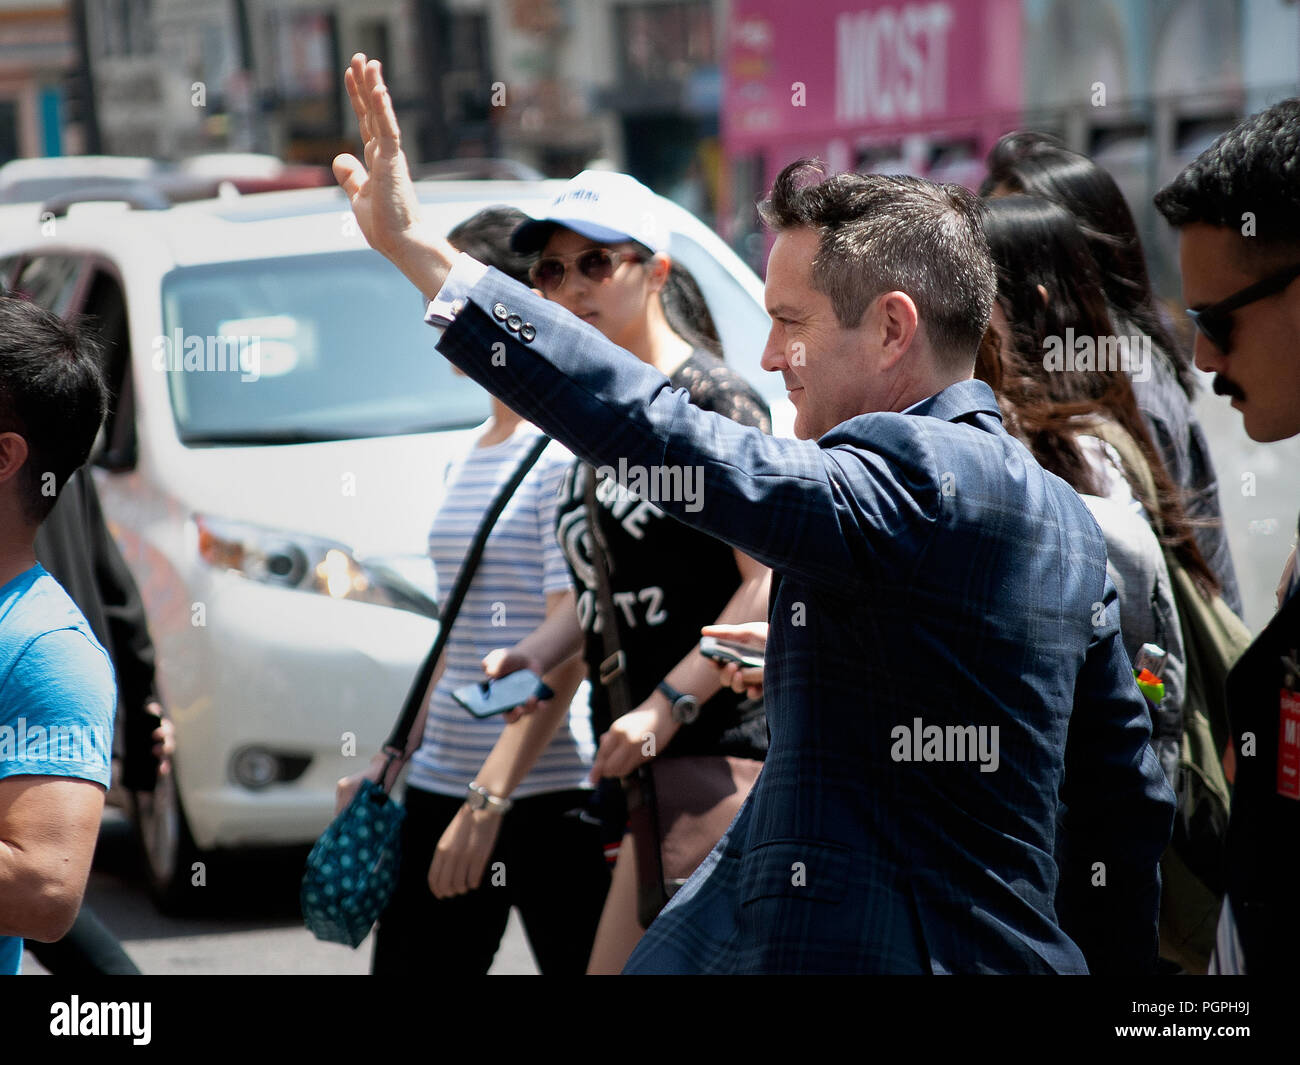 Los Angeles, USA - August 27, 2018: Thomas Lennon greets fans at Weird Al Yankovic's Hollywood Walk of Fame star ceremony Credit: Jimmie Tolliver/Alamy Live News Stock Photo